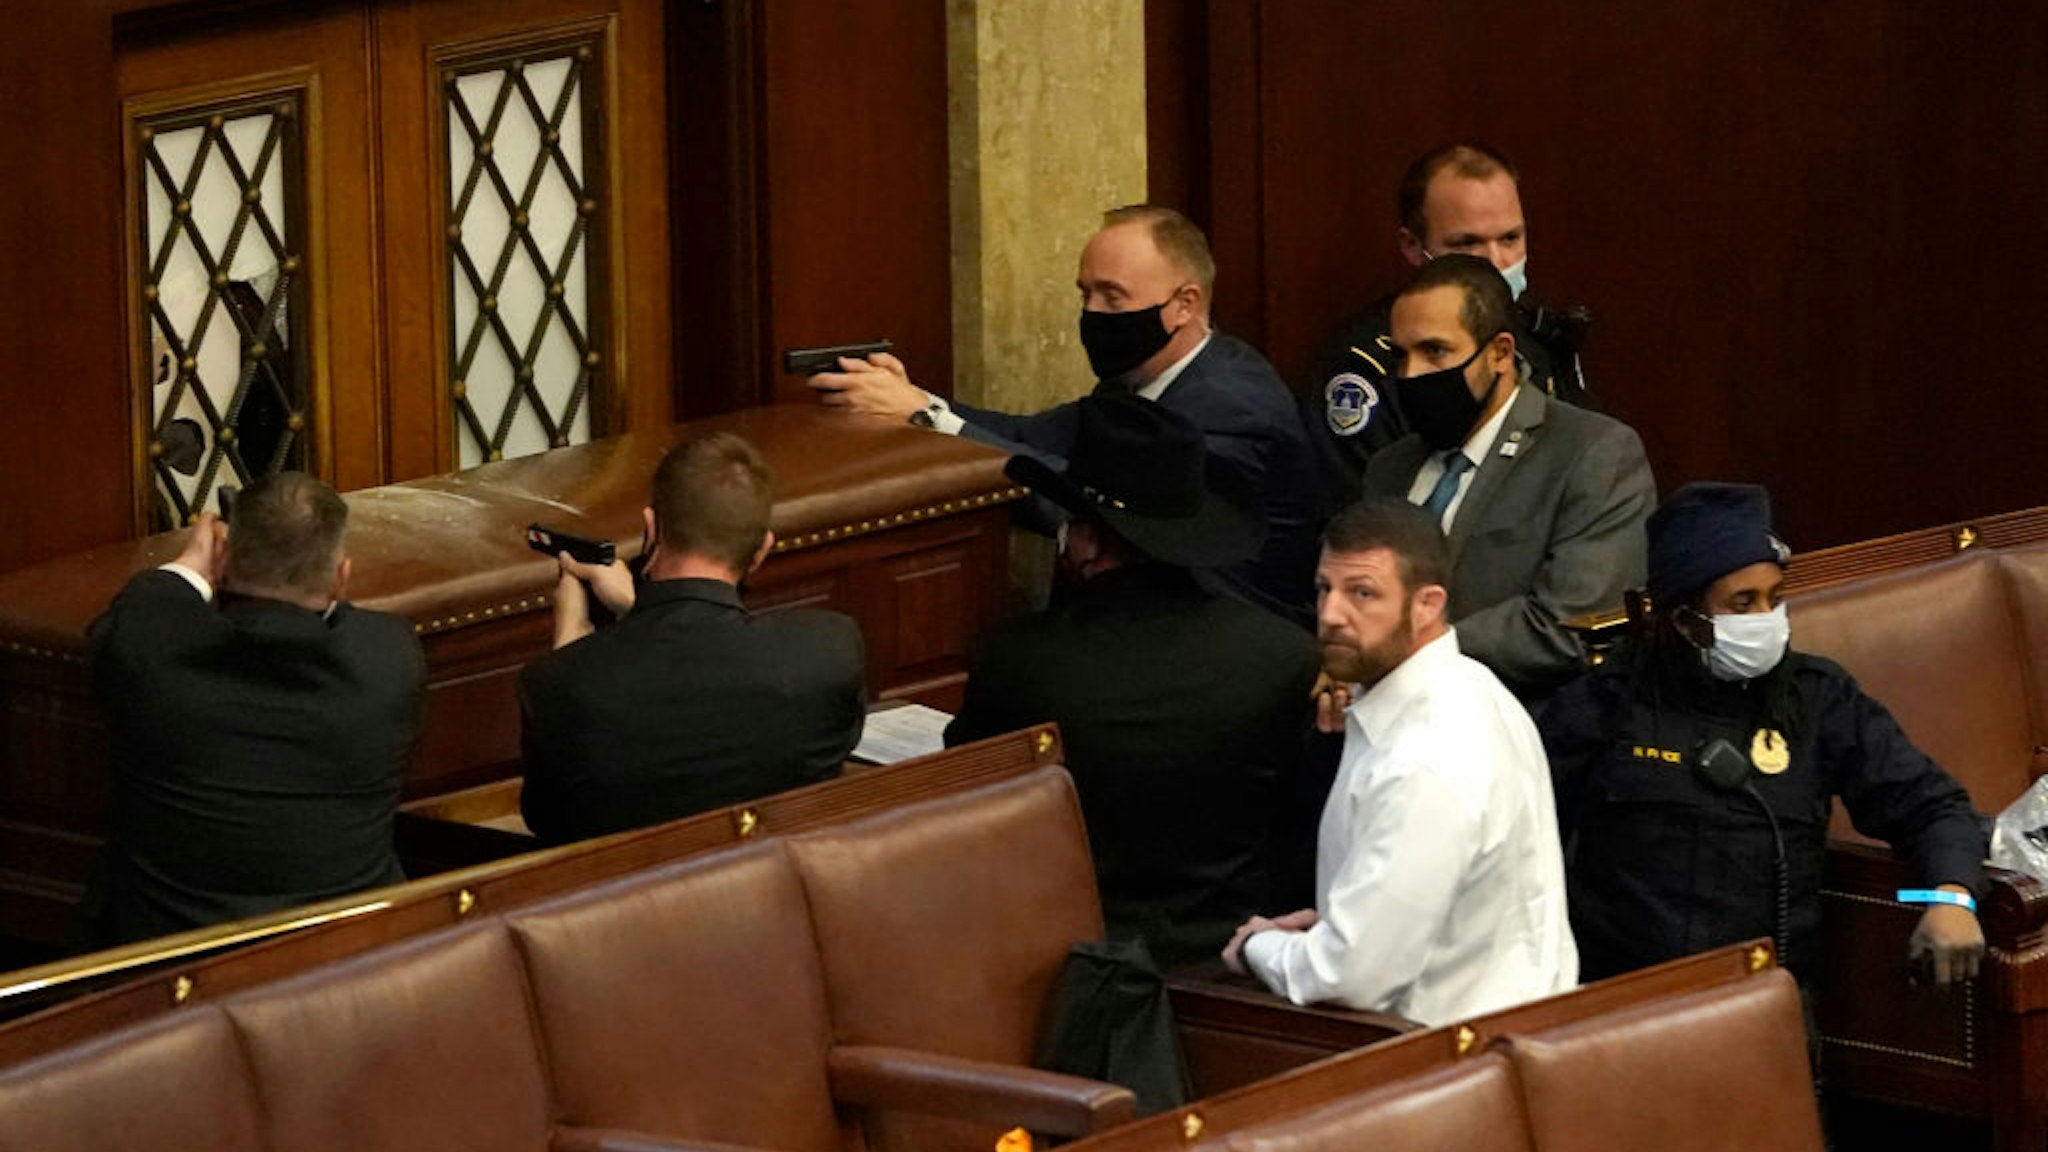 WASHINGTON, DC - JANUARY 06: U.S. Capitol police officers point their guns at a door that was vandalized in the House Chamber during a joint session of Congress on January 06, 2021 in Washington, DC. Congress held a joint session today to ratify President-elect Joe Biden's 306-232 Electoral College win over President Donald Trump. A group of Republican senators said they would reject the Electoral College votes of several states unless Congress appointed a commission to audit the election results. (Photo by Drew Angerer/Getty Images)